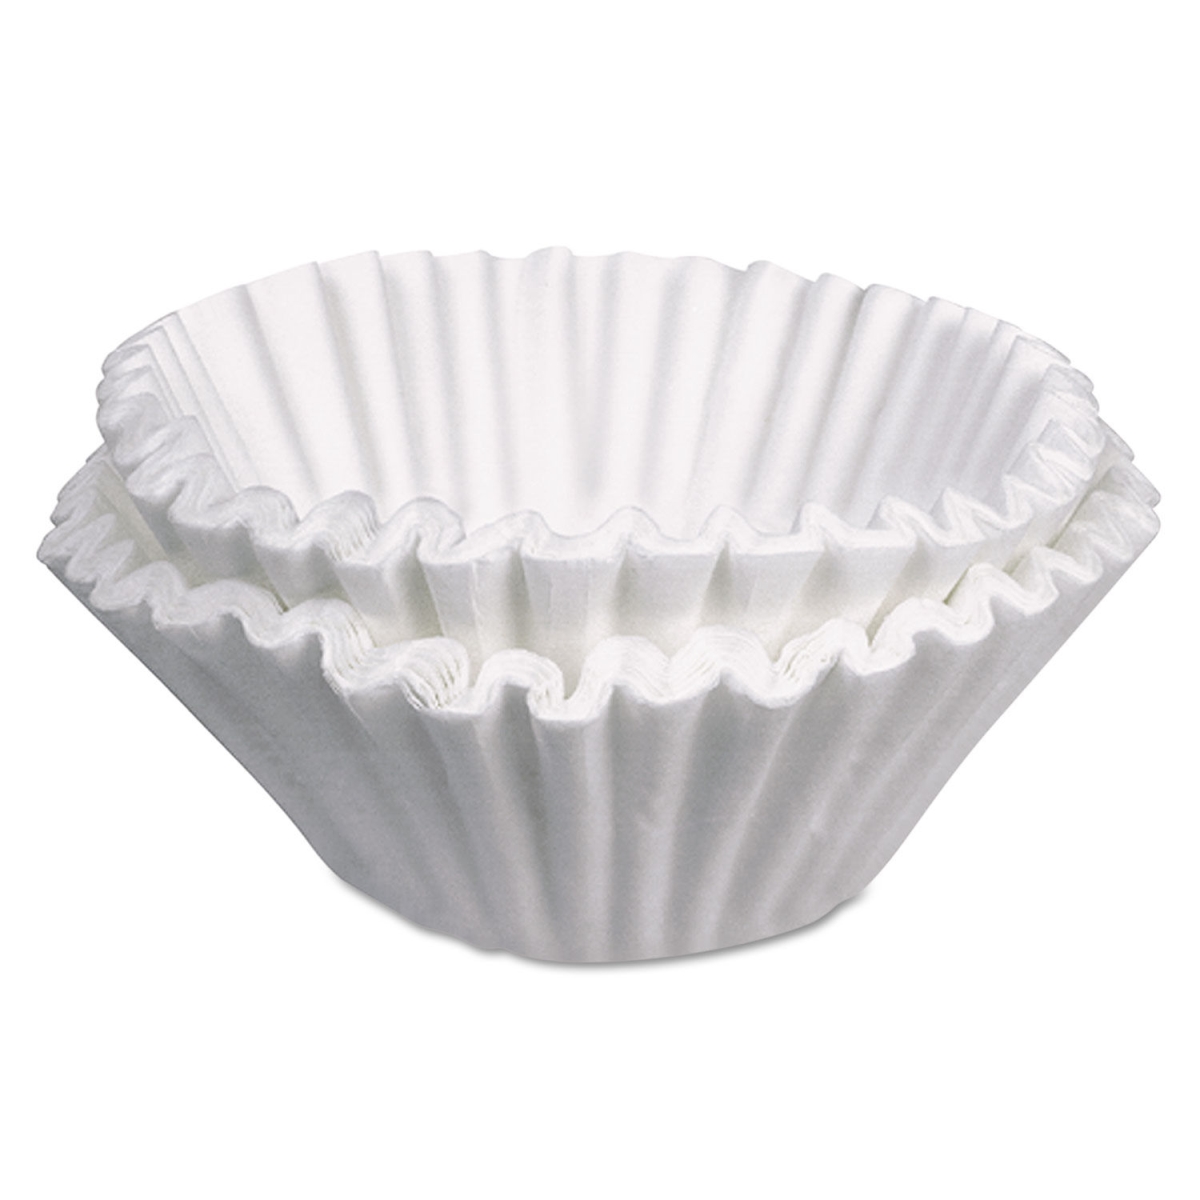 Picture of Bunn-O-Matic 20113.0000 10 gal Urn Style Flat Bottom Commercial Coffee Filters - 250 Count